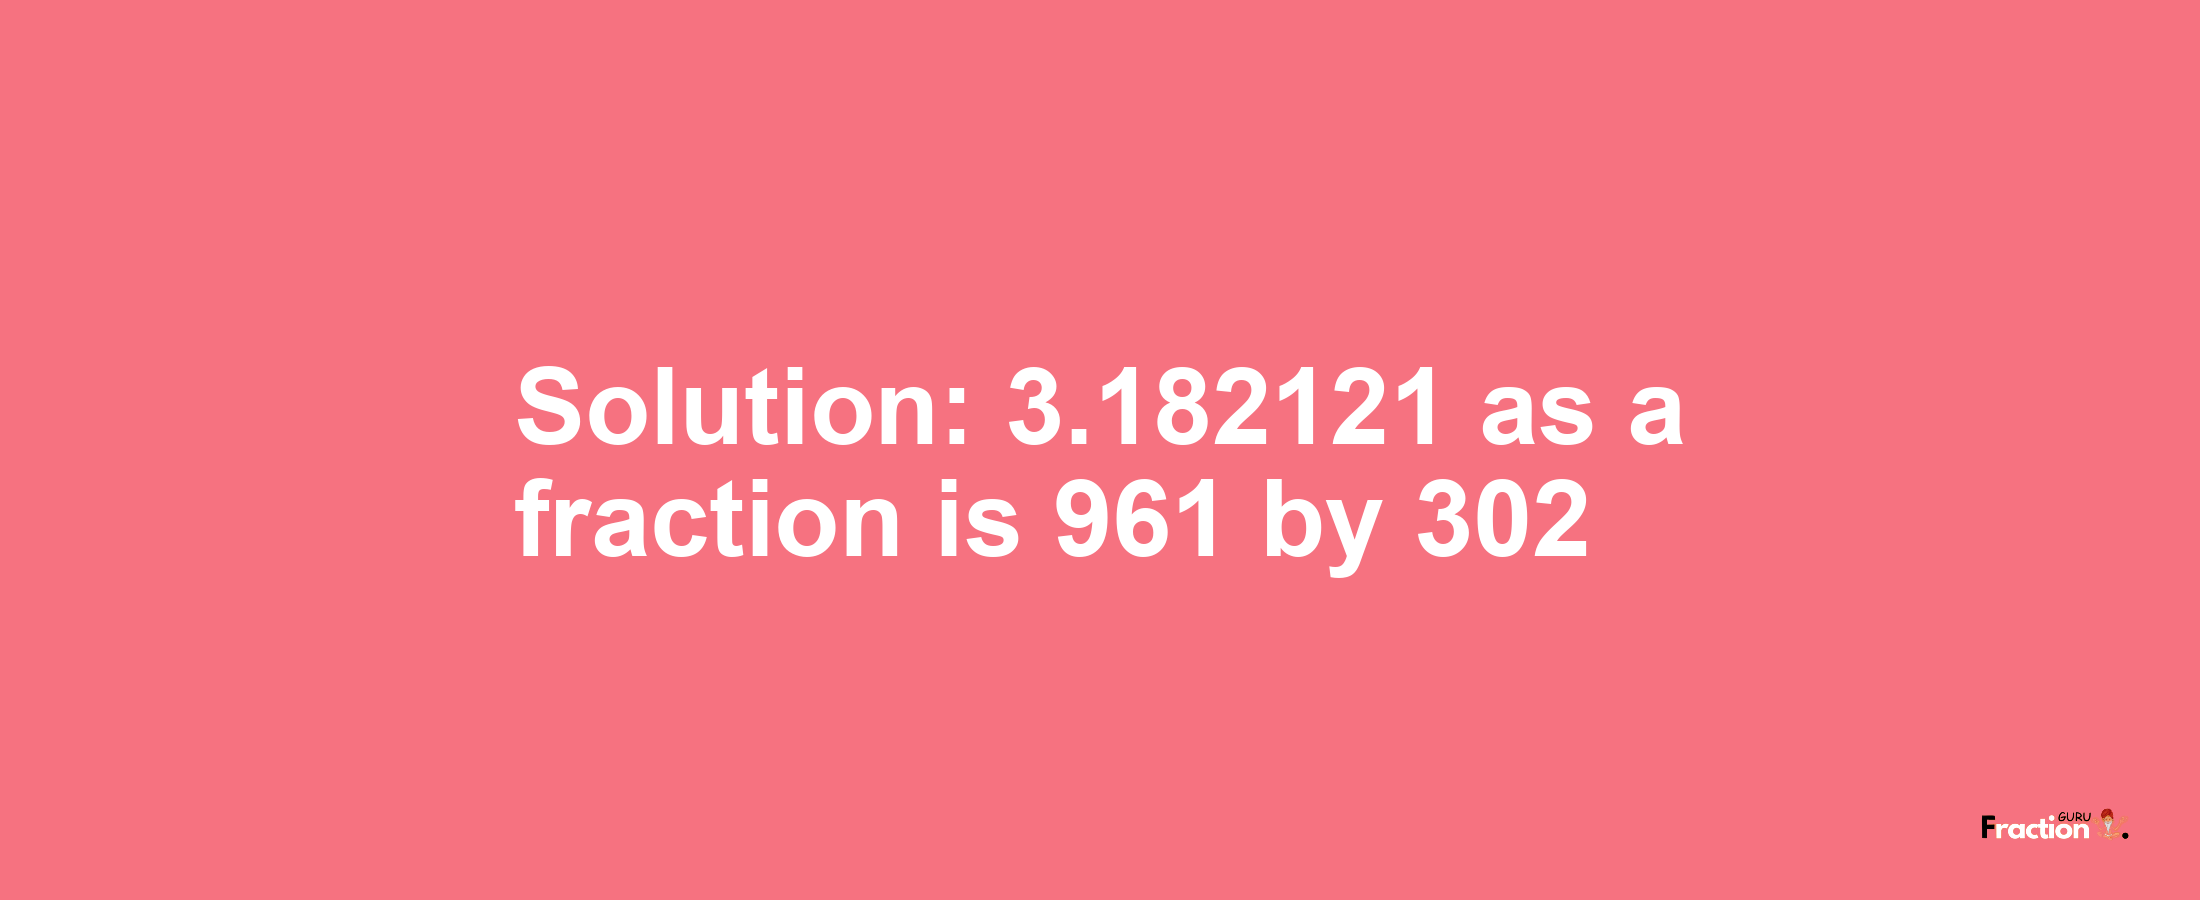 Solution:3.182121 as a fraction is 961/302